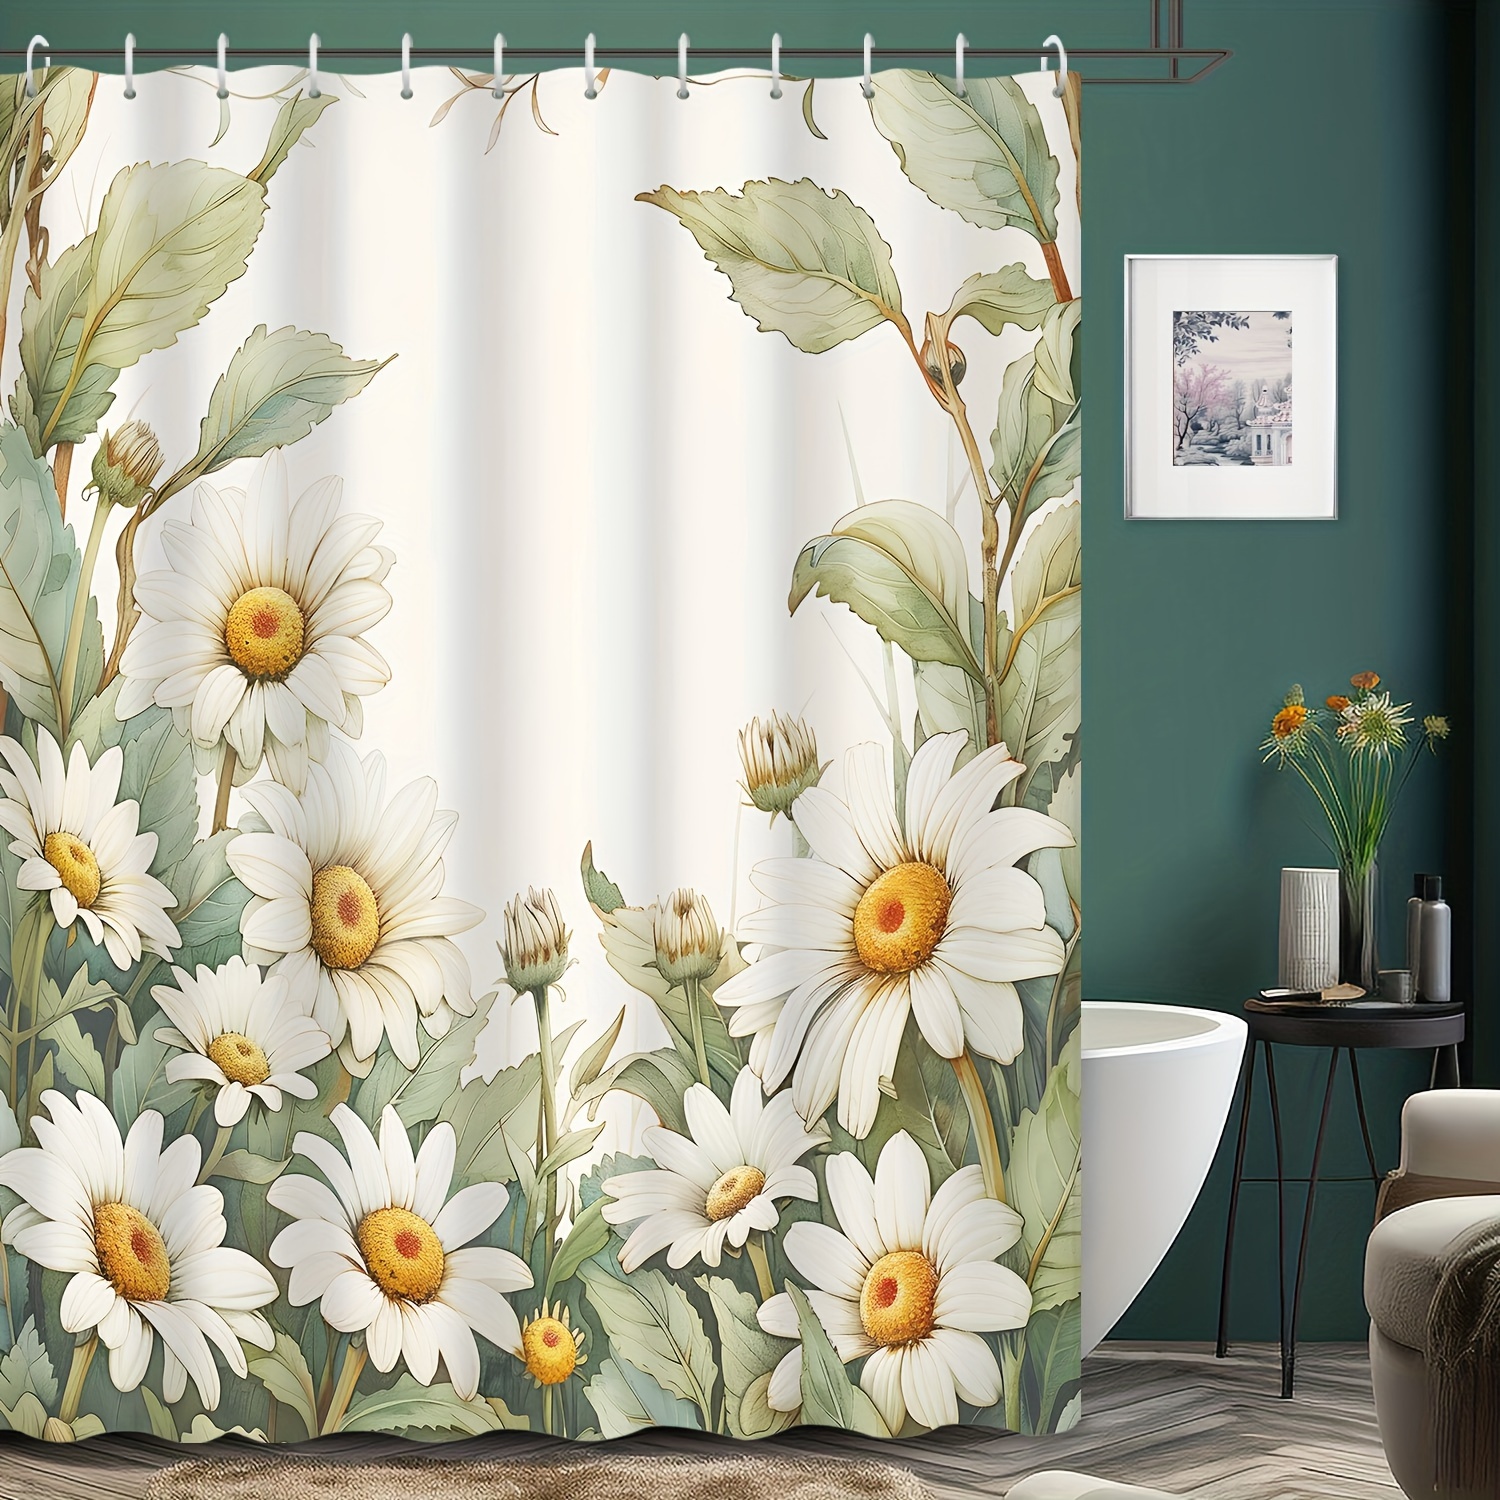 

Water-resistant Polyester Shower Curtain With Daisy Flower And Green Leaf Print – Machine Washable, Includes Hooks, Grommet Top, Woven Fabric, Plant And Floral Theme For Bathroom Decor, 72x72 Inches